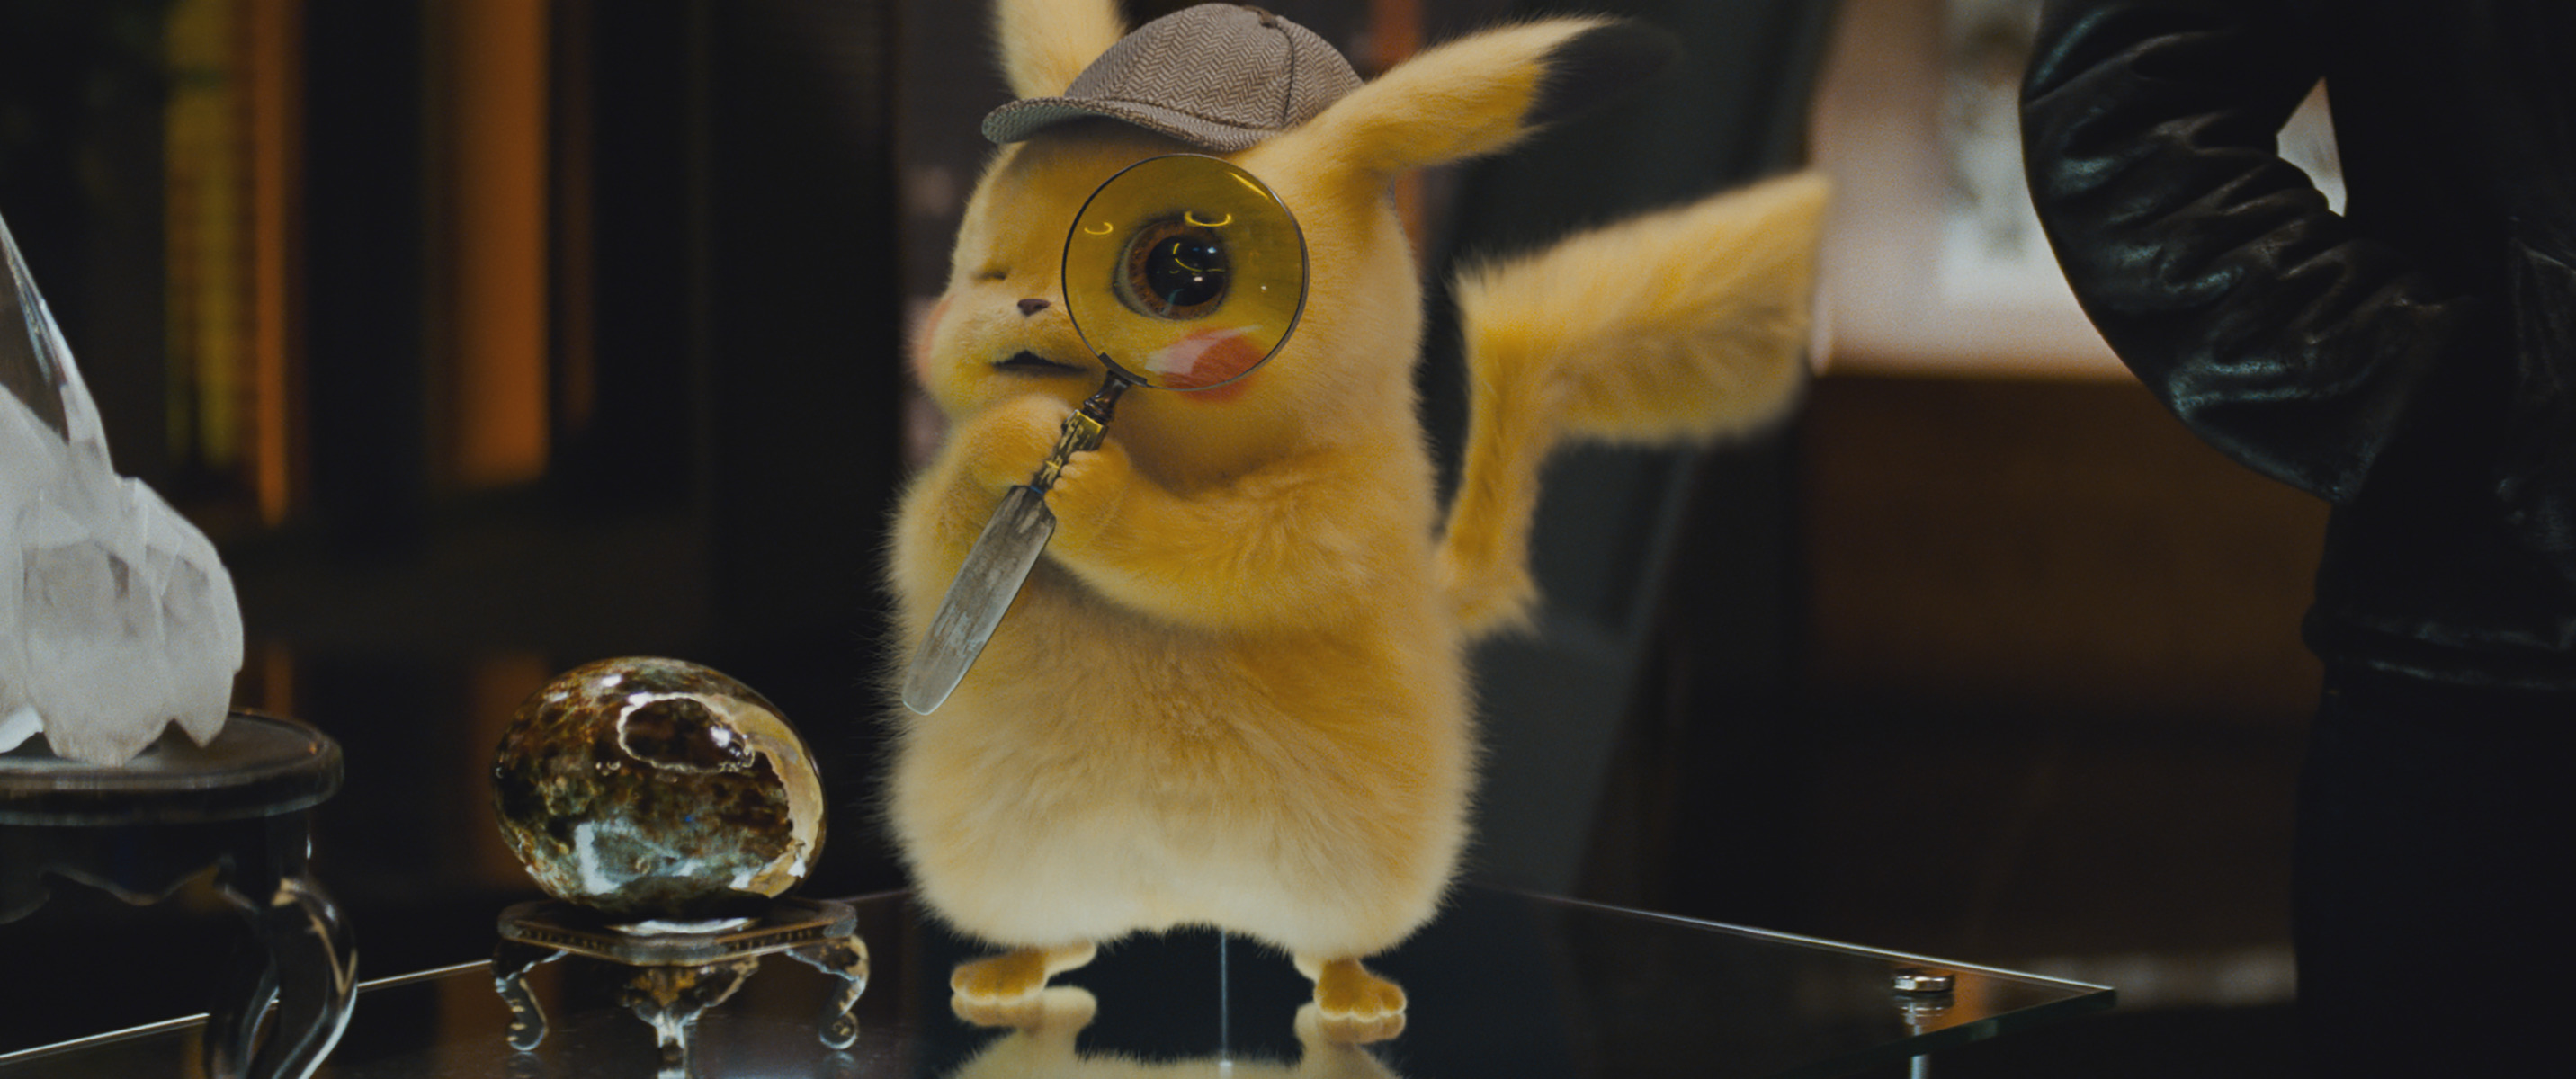 Detective Pikachu Film Review This Is How You Adapt A Video Game For Theaters Ars Technica